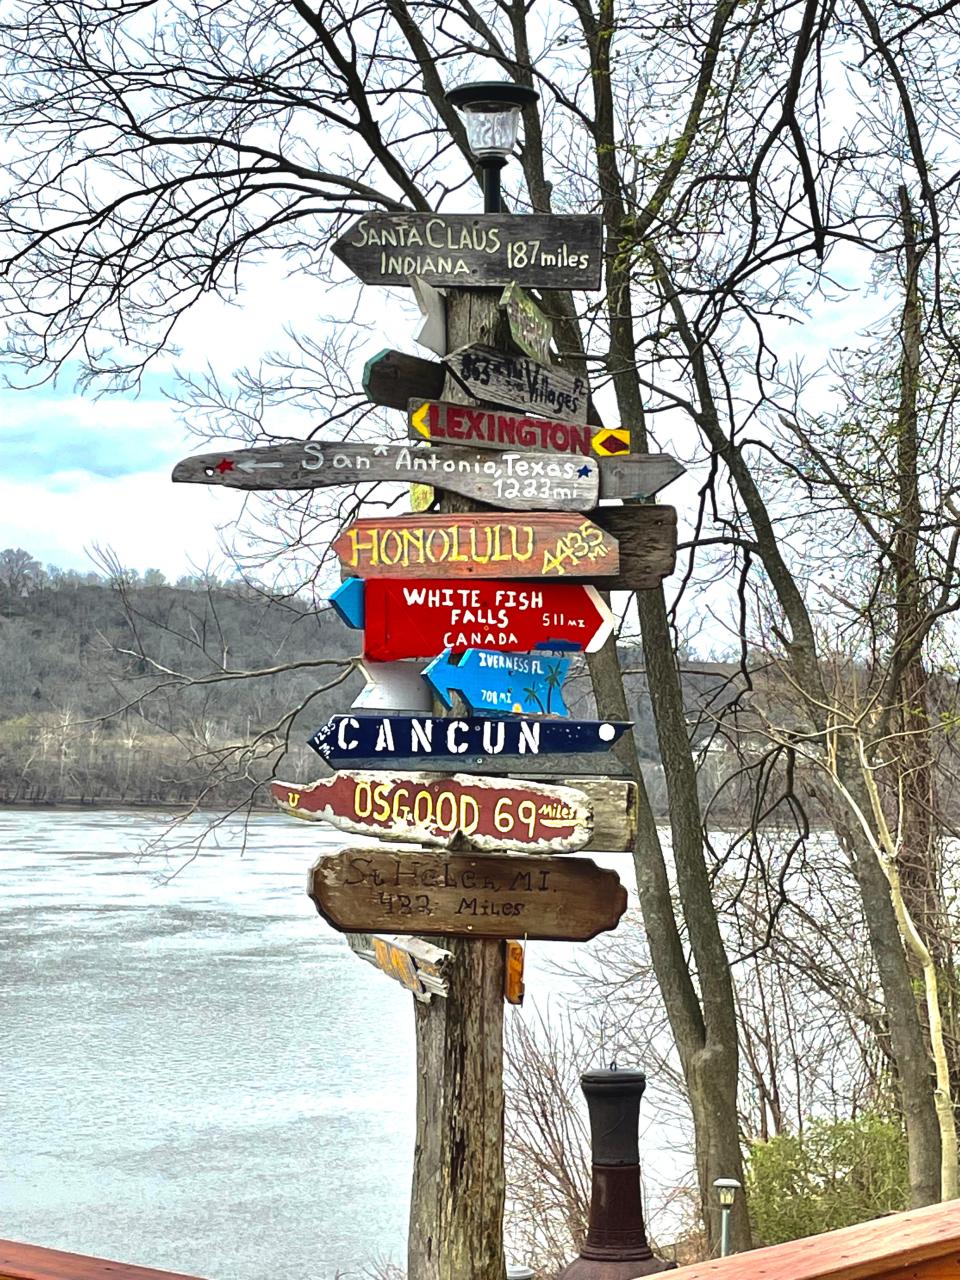 A riverbank sign indicates distance to some of the hometowns of visitors to the museum and regatta.